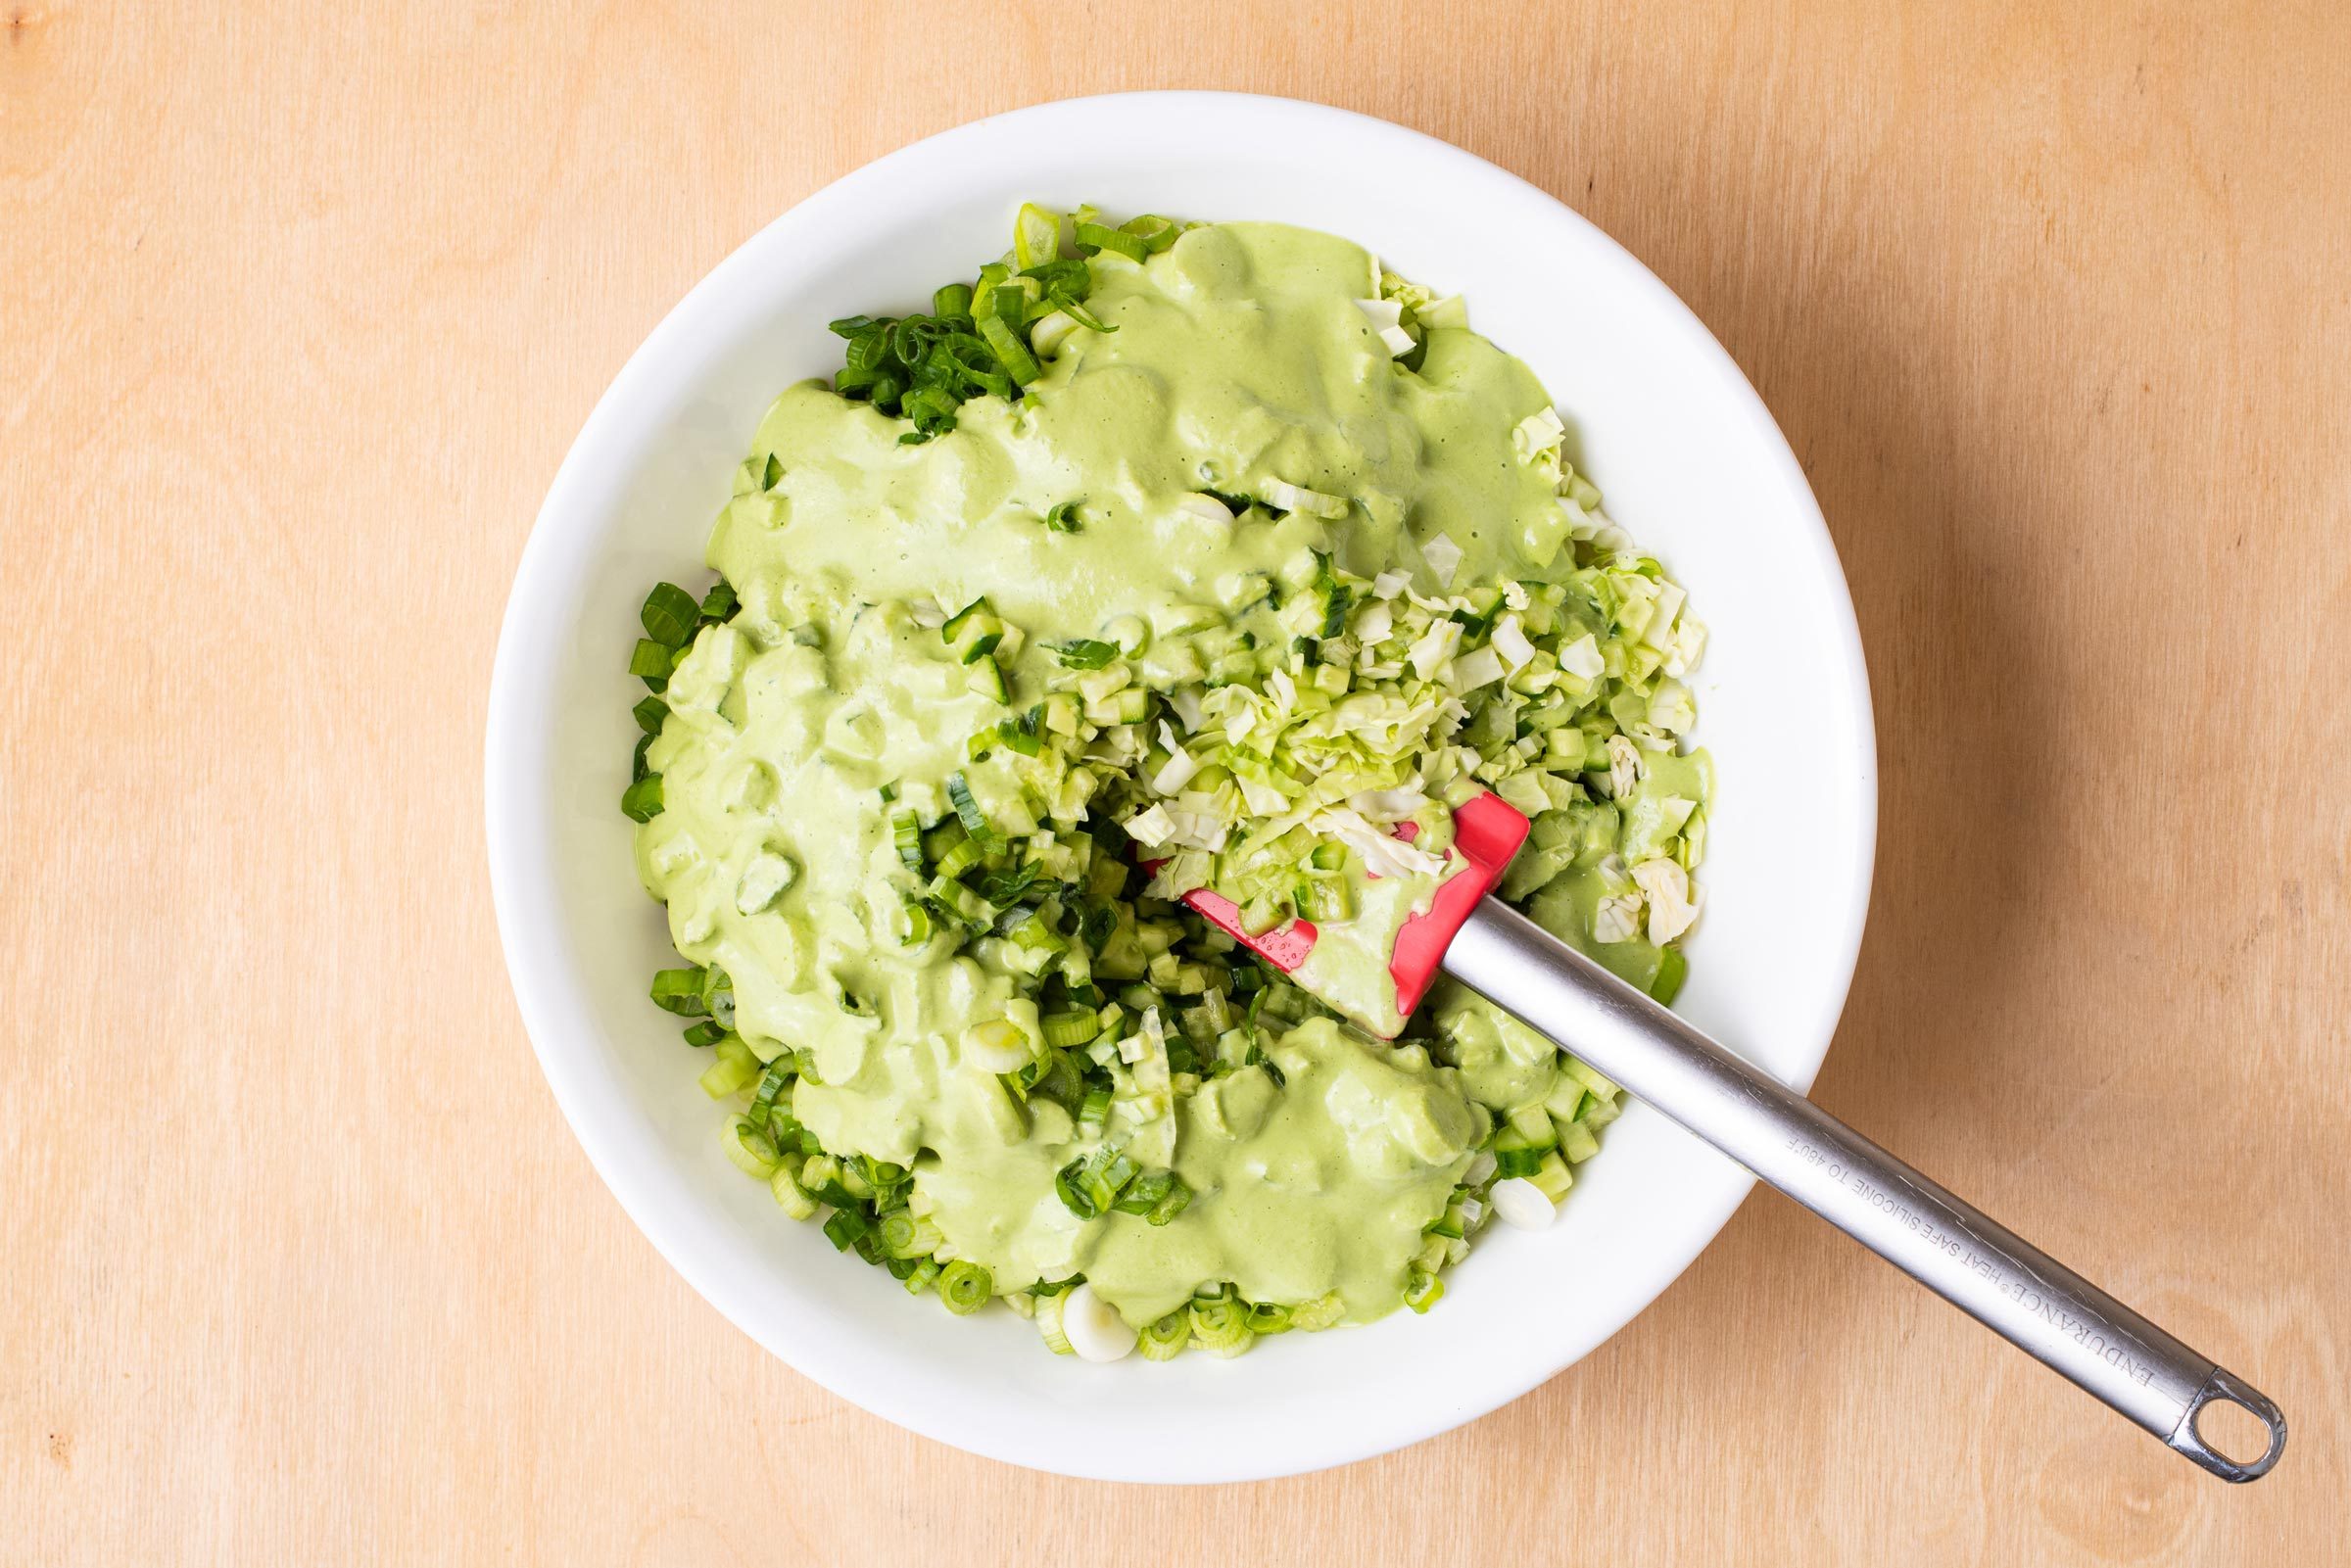 Spring into Easter with this Green Goddess Salad Recipe from Little Saint